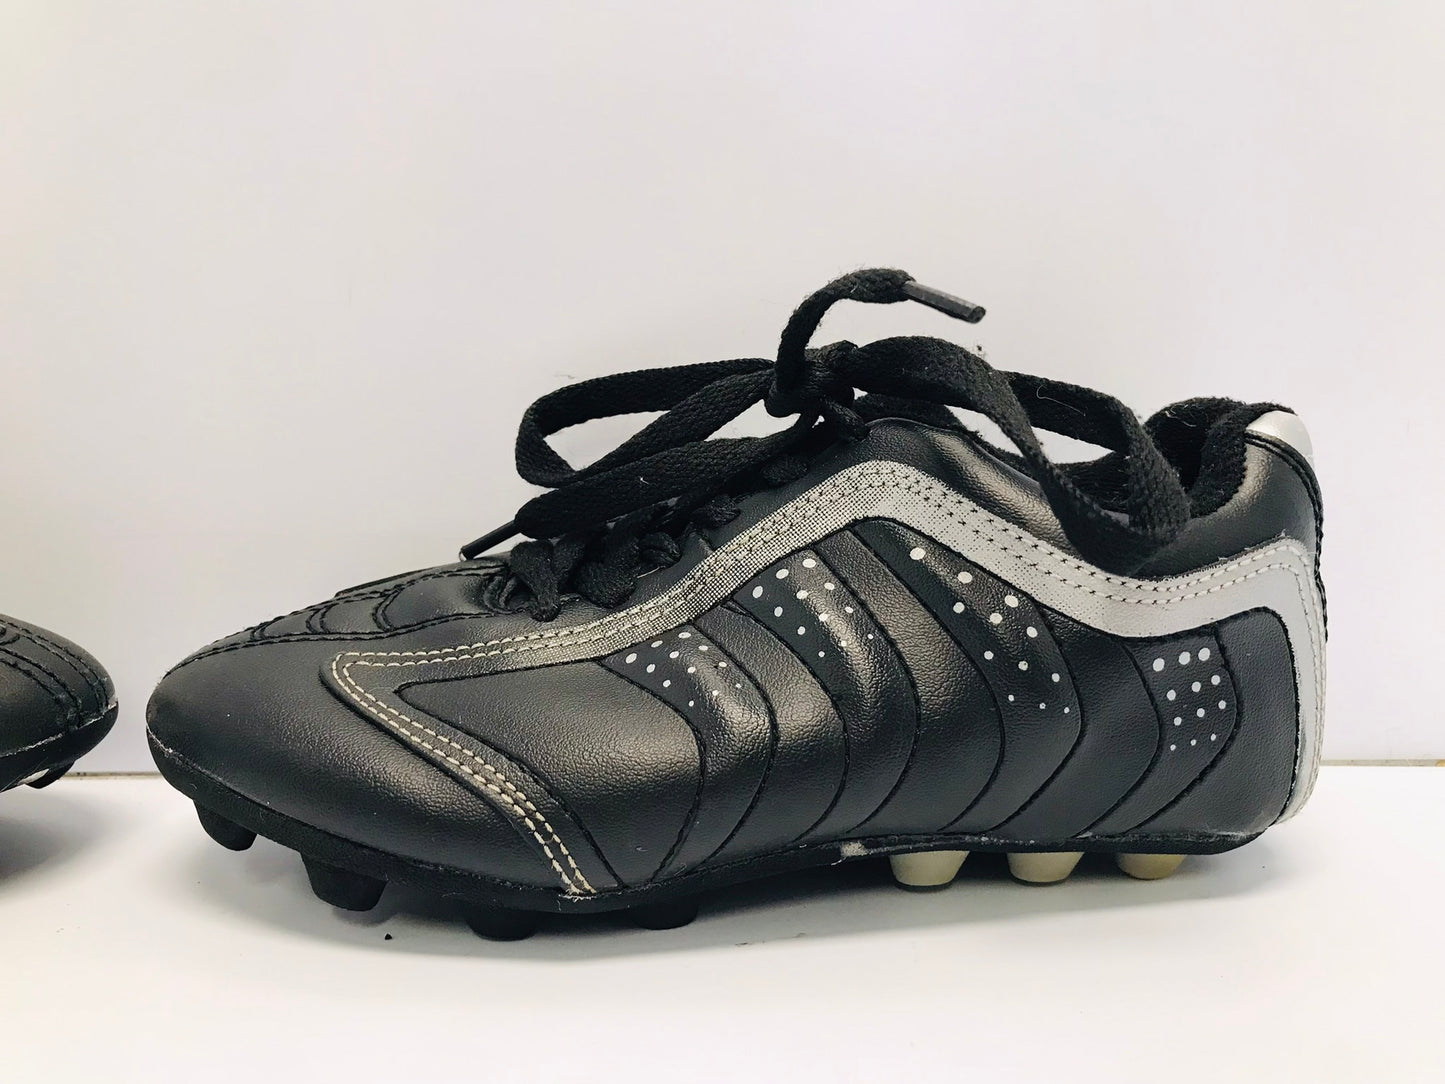 Soccer Shoes Cleats Child Size 12 Athletic Black